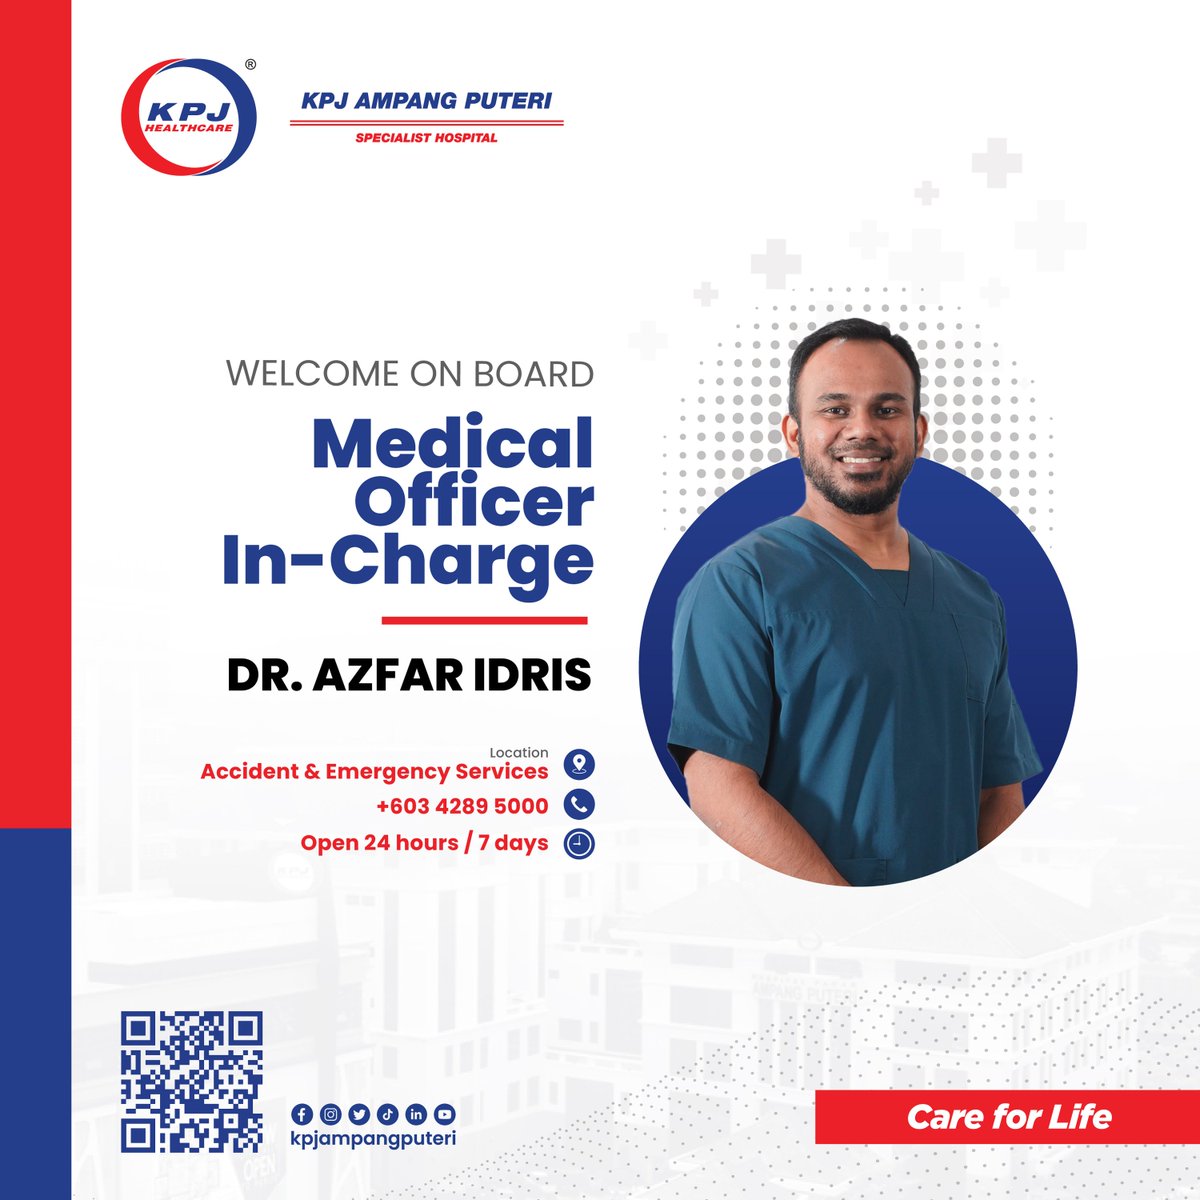 New appointment on Board: Dr. Azfar Idris

Please join us in wishing Dr. Azfar Idris the best of luck and welcoming him into his new role as Medical Officer In-Charge at our Accident and Emergency. 

#KPJAmpangPuteriSpecialistHospital
#KPJAPSH
#CareforLife
#WelcomeDrAzfarIdris